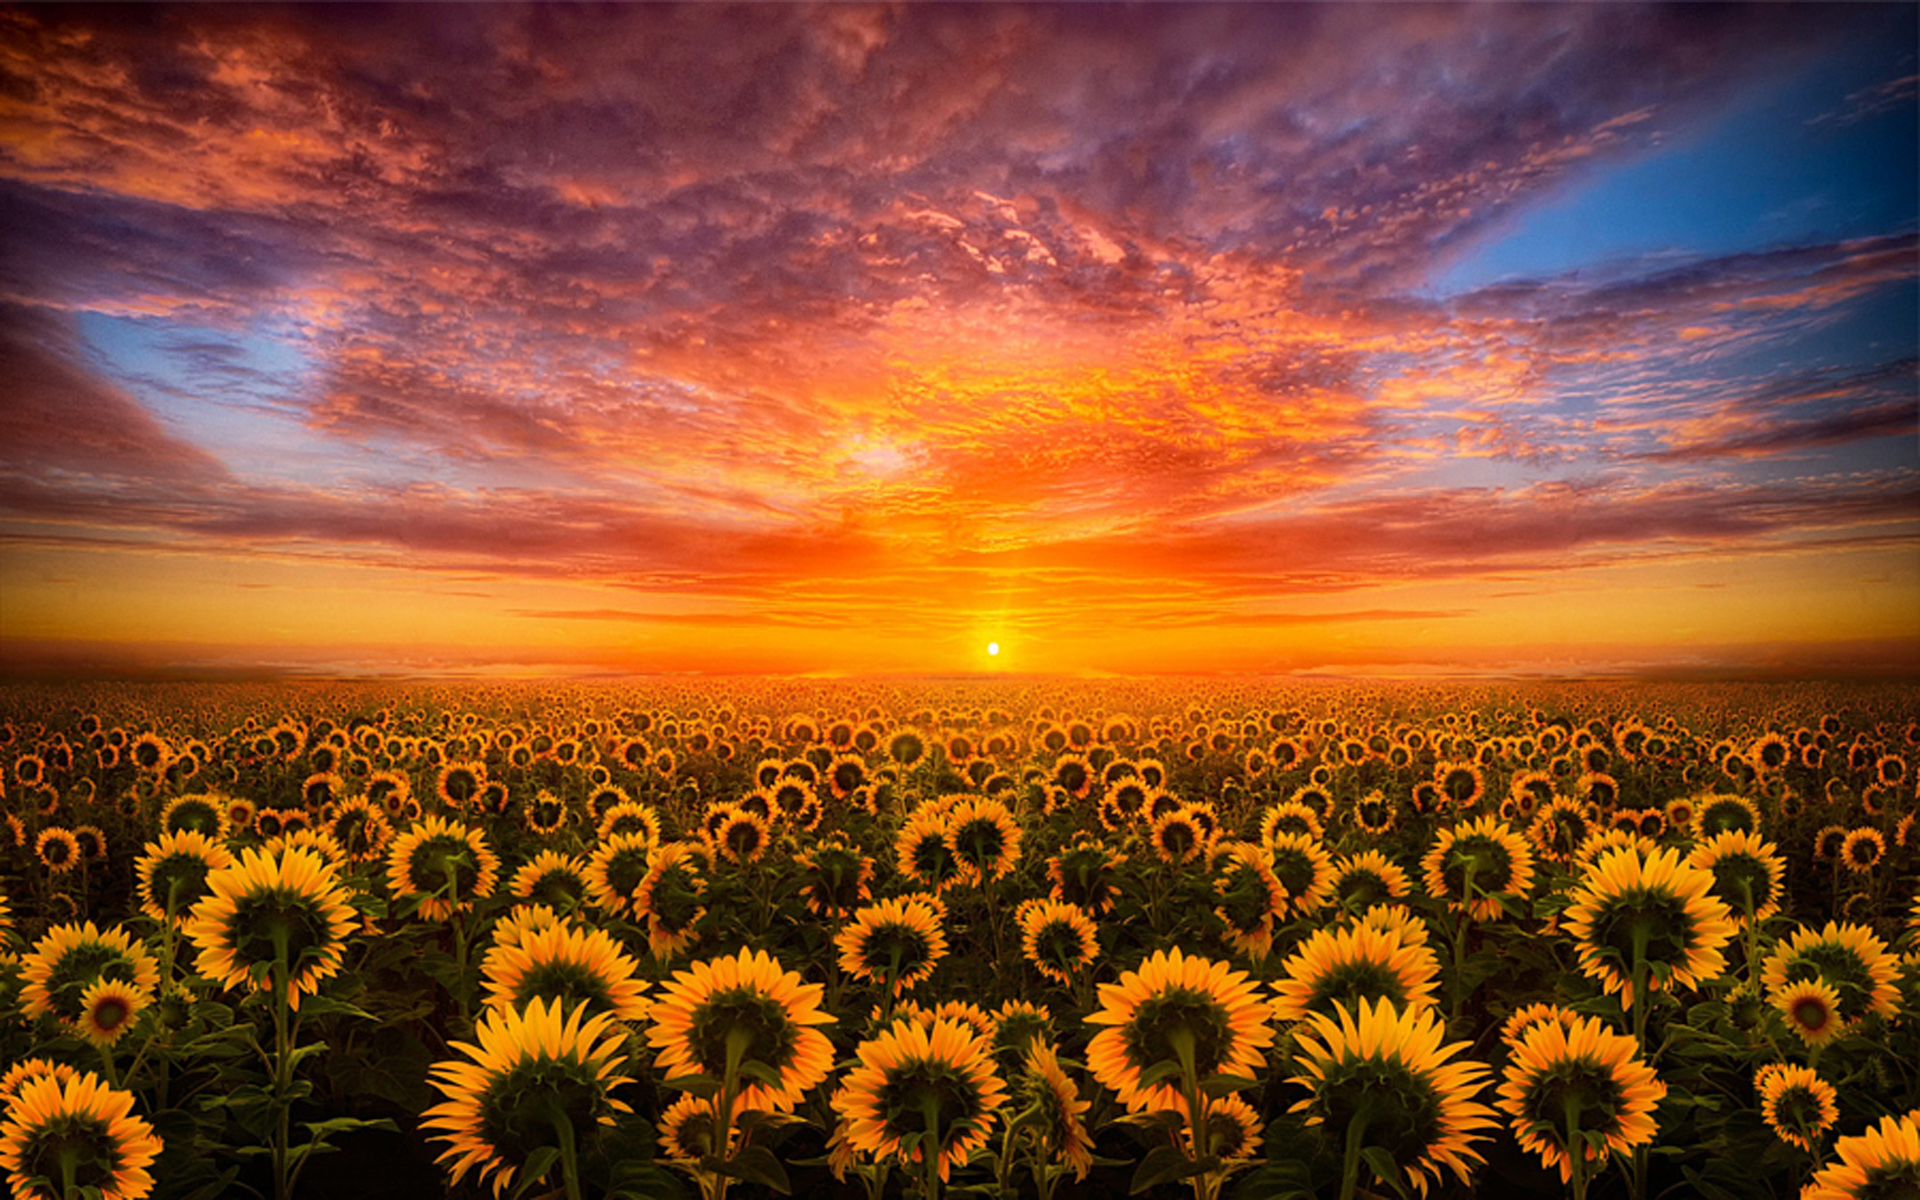 Sunset Red Sky Cloud Field With Sunflower Hd Desktop Wallpaper For Mobile   Wallpapers13com